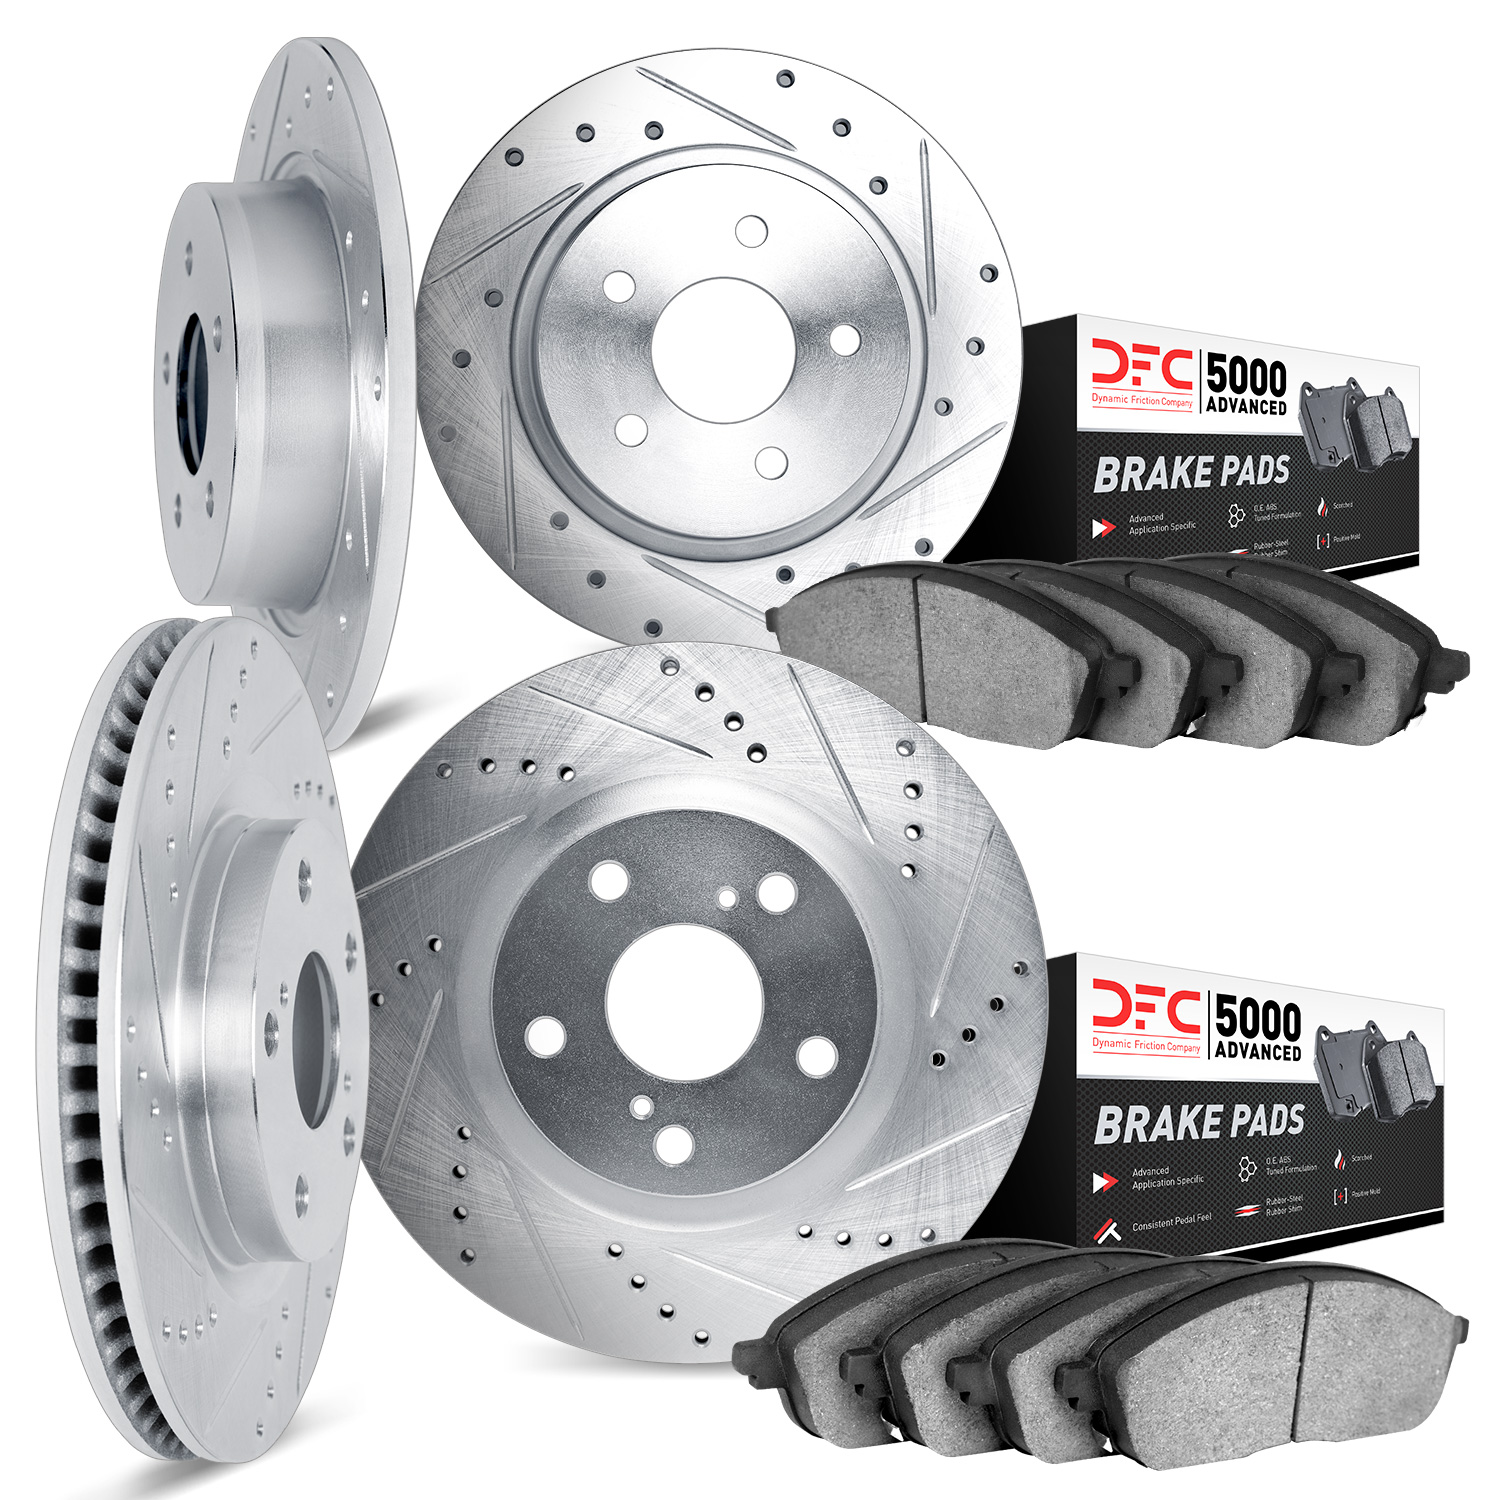 7504-54294 Drilled/Slotted Brake Rotors w/5000 Advanced Brake Pads Kit [Silver], 2017-2019 Ford/Lincoln/Mercury/Mazda, Position: